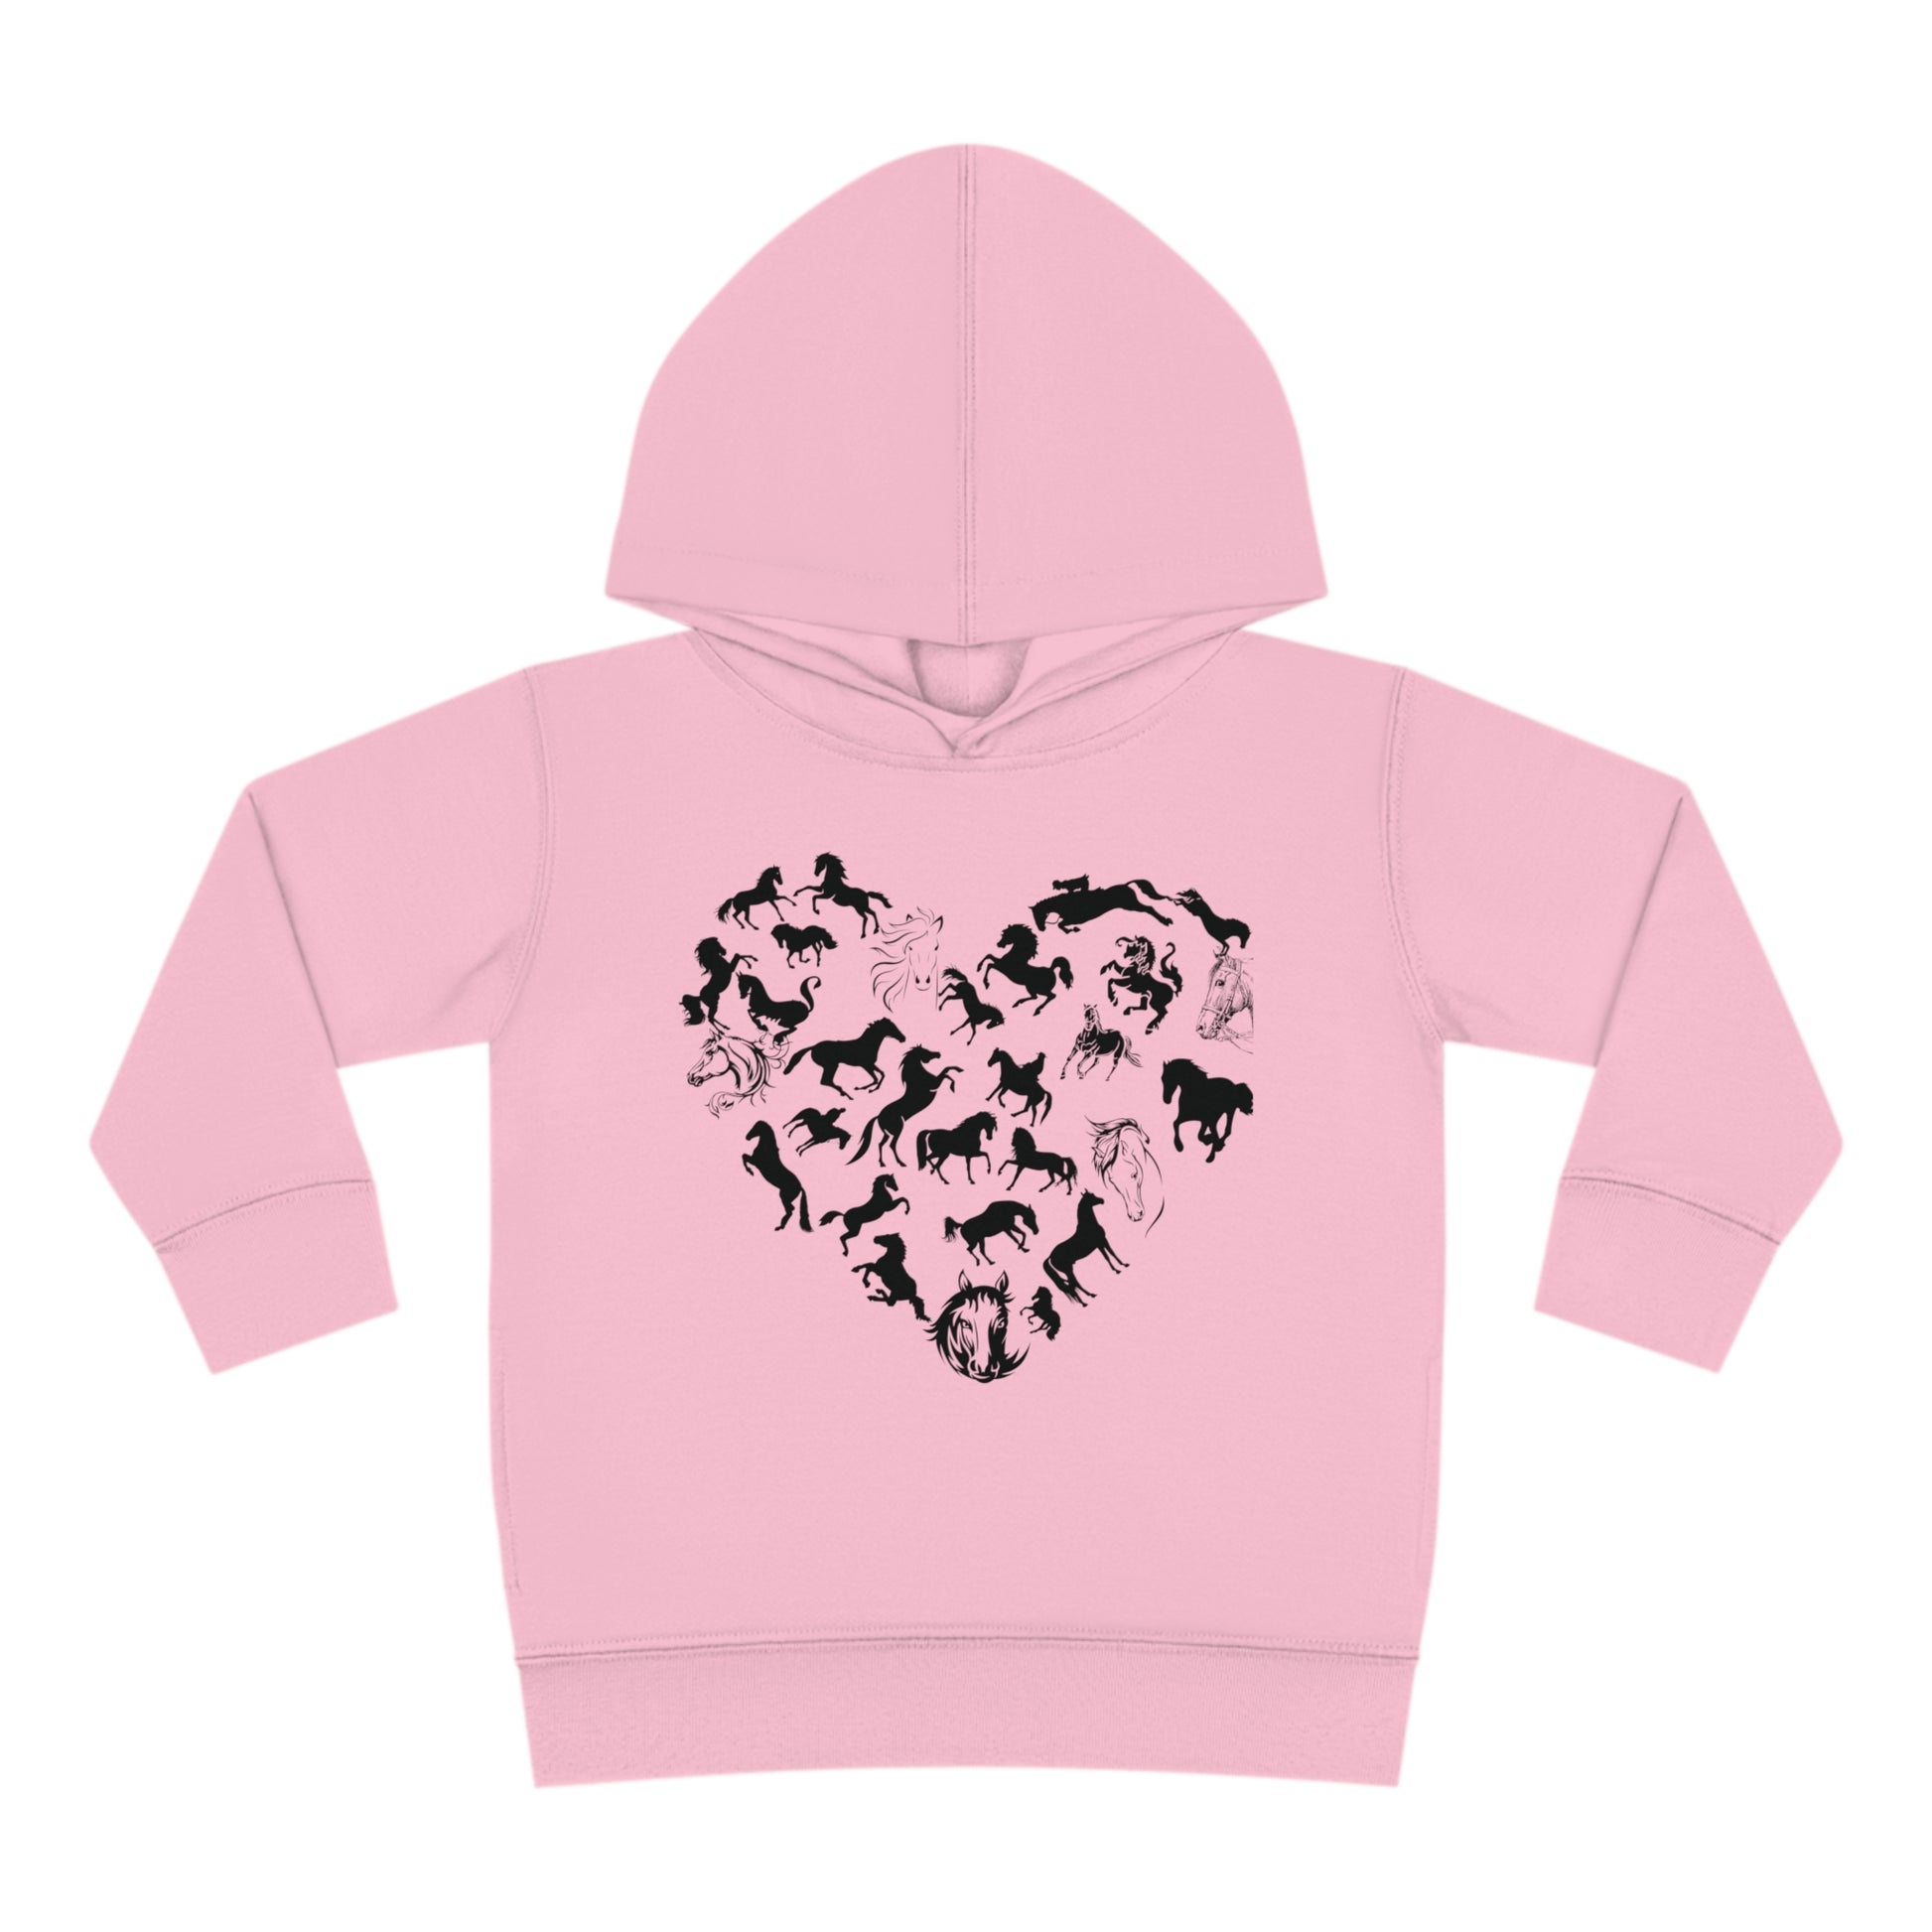 Horse Heart Hoodie | Horse Lover Tee - Horses Heart Toddler - Horse Lover Gift - Horse Toddler Shirt - Equestrian Tee - Gift for Horse Owner Kids clothes Pink 2T 